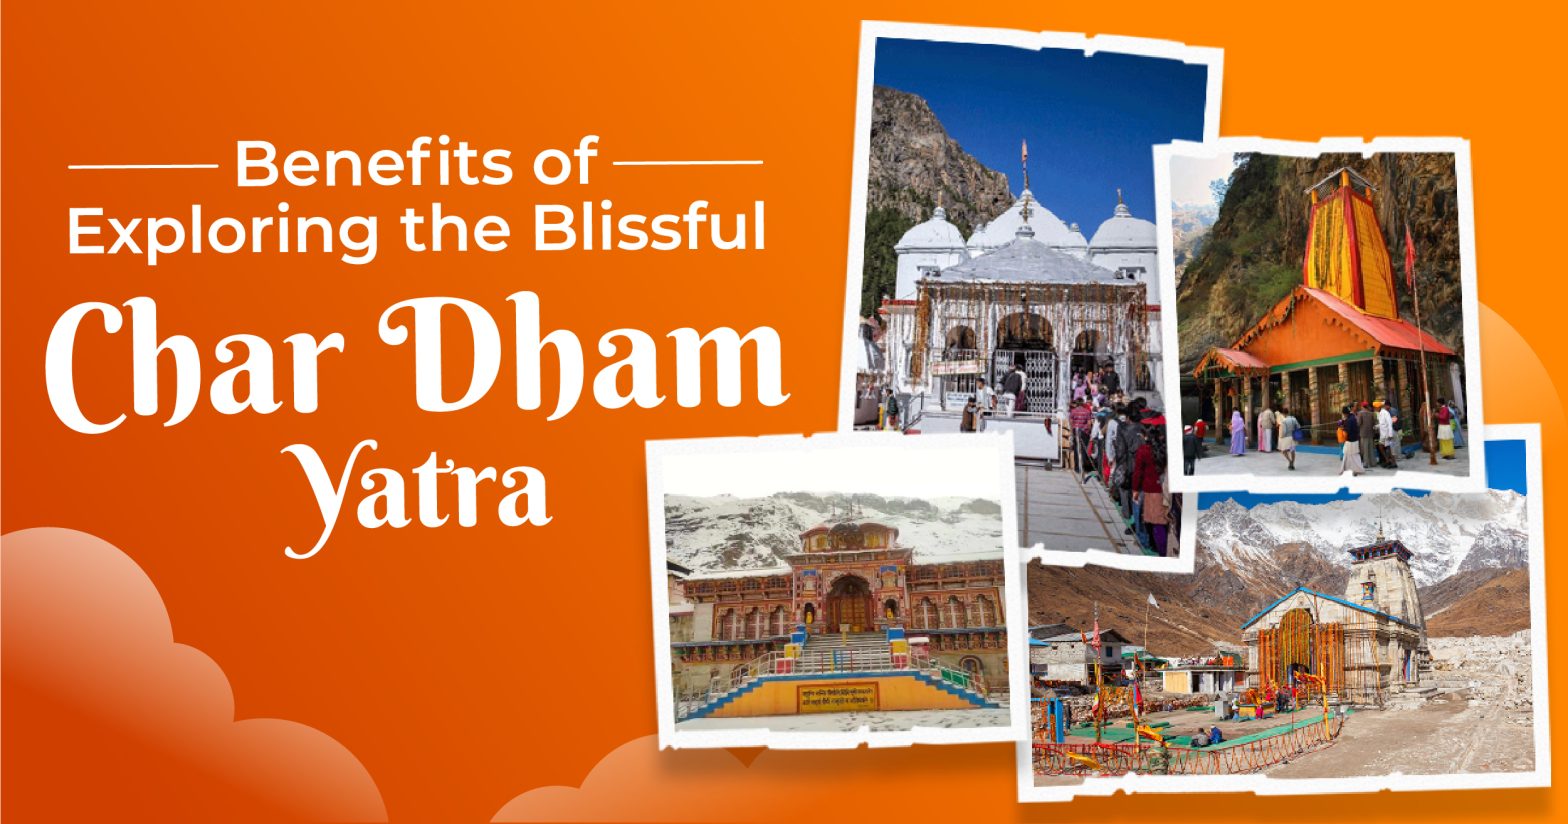 Benefits of Exploring the Blissful Char Dham Yatra